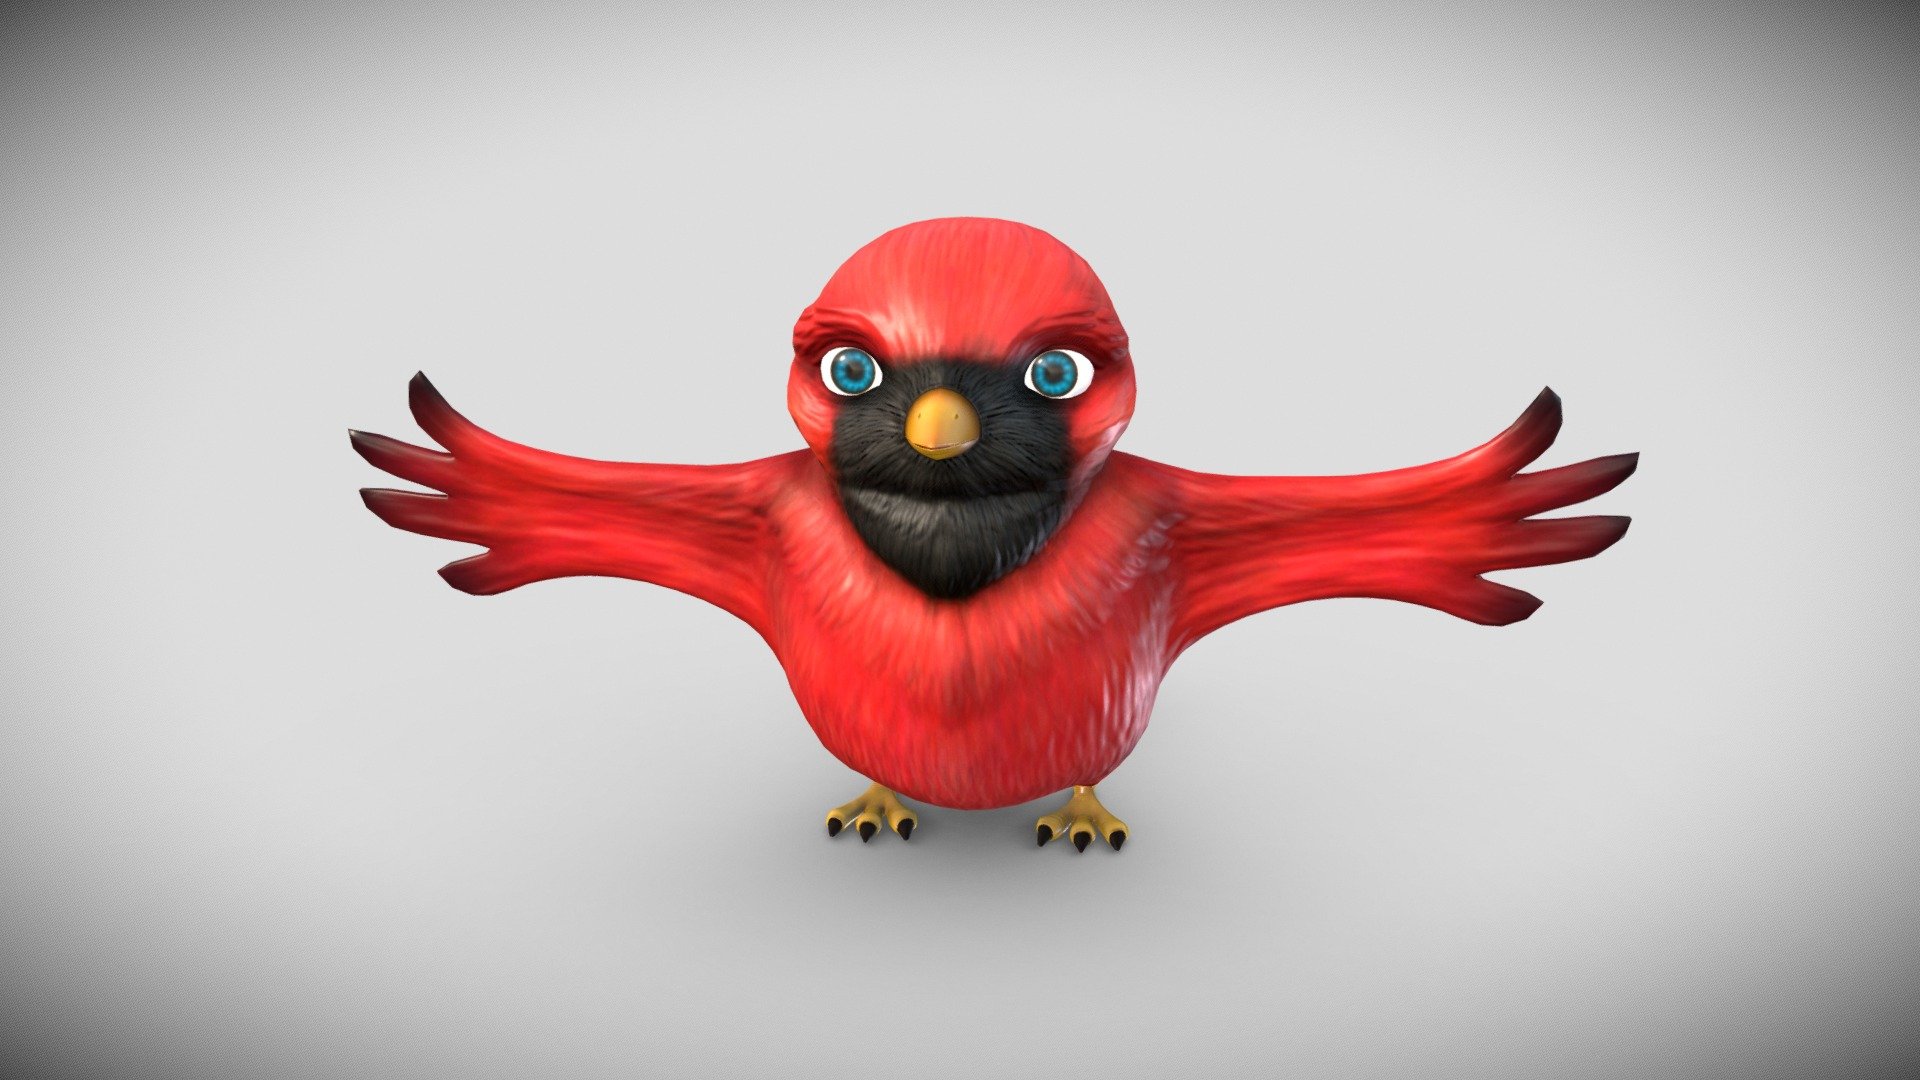 A cartoony Cardinal bird model with textures.

Color, Specular/Gloss, Normal, And Occlusion maps included (2048).

Collada, FBX, and OBJ formats included 3d model